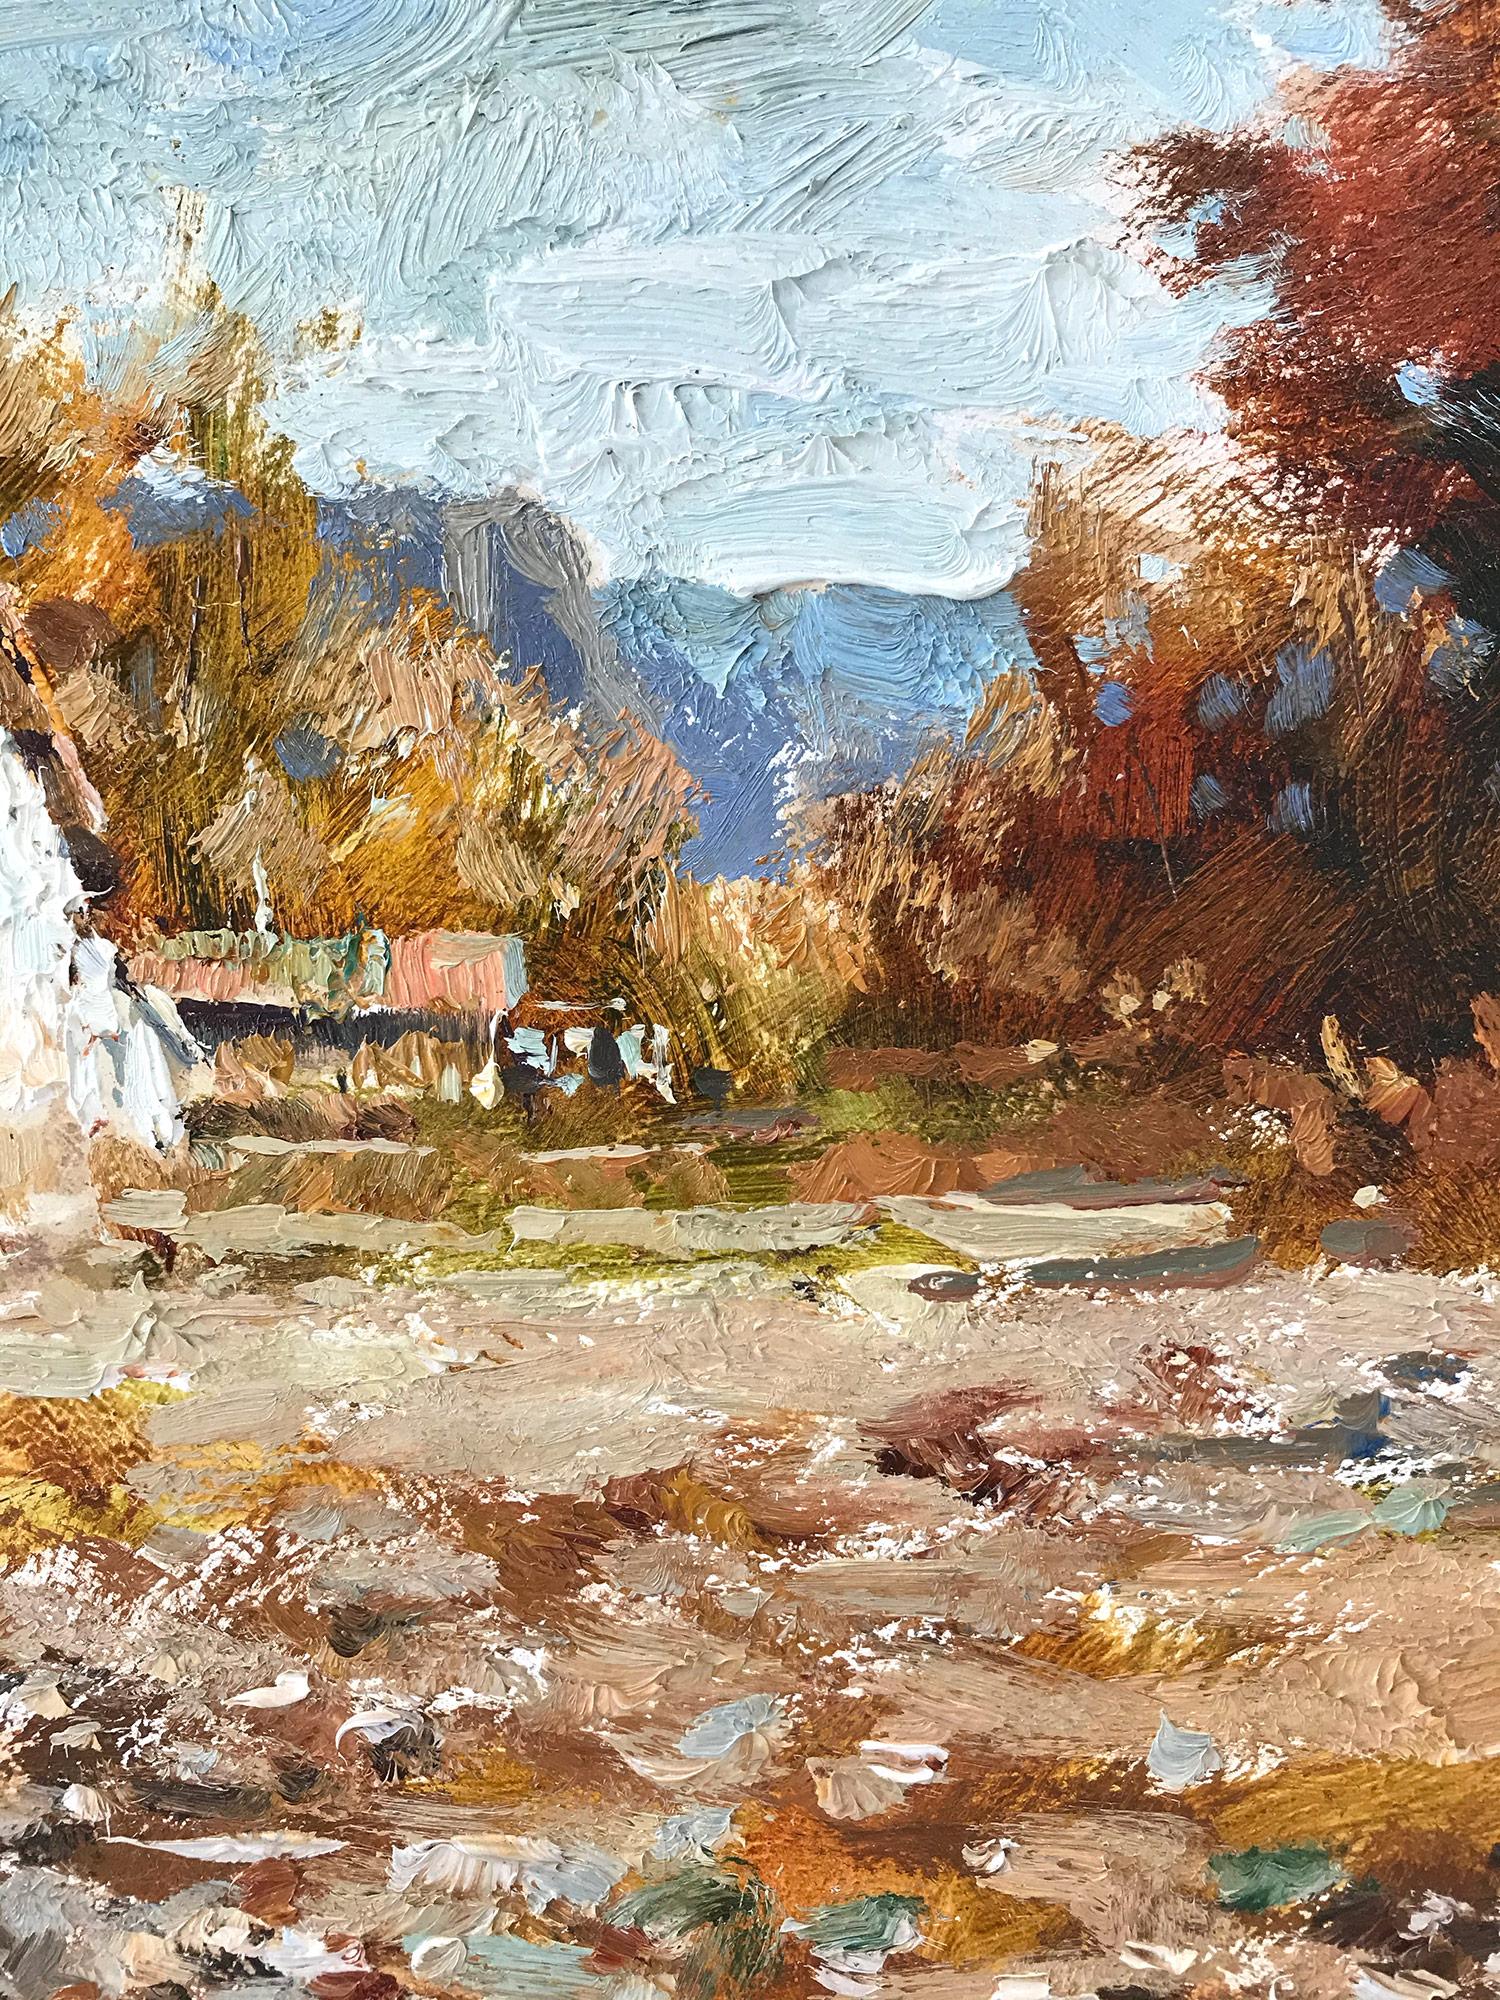 Eric Michaels is known for his impressionistic scenes from all over the world. His extensive travel allows for his inspiration to flow free and to render locations of the Mid-west, across the US and Europe. Mostly known for his pastoral strong use